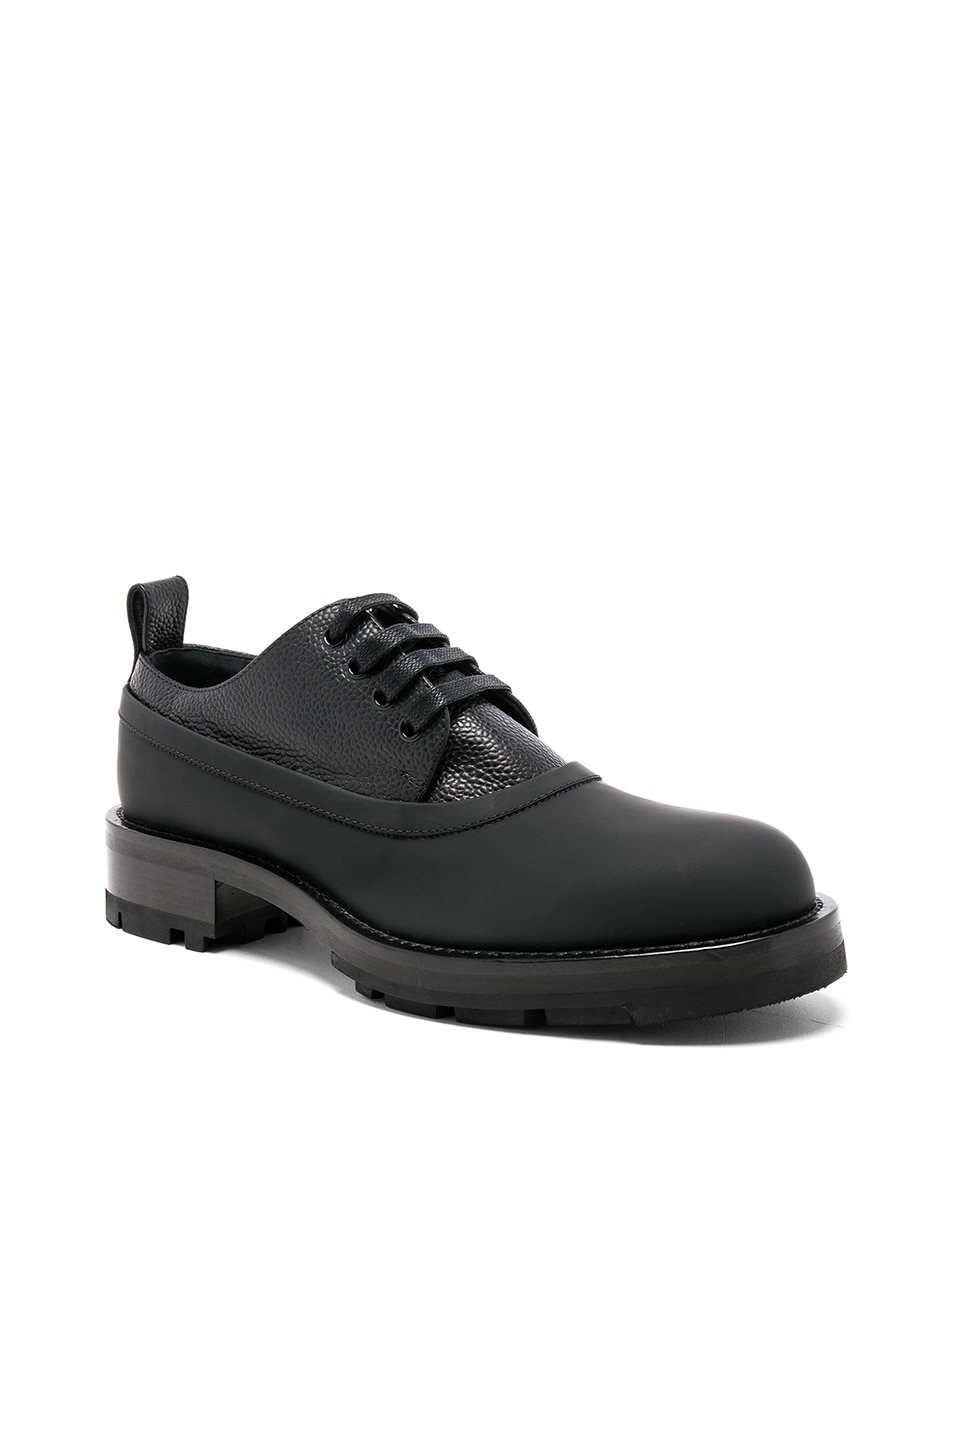 Image 1 of Marni Lace Up Leather Dress Shoes in Black